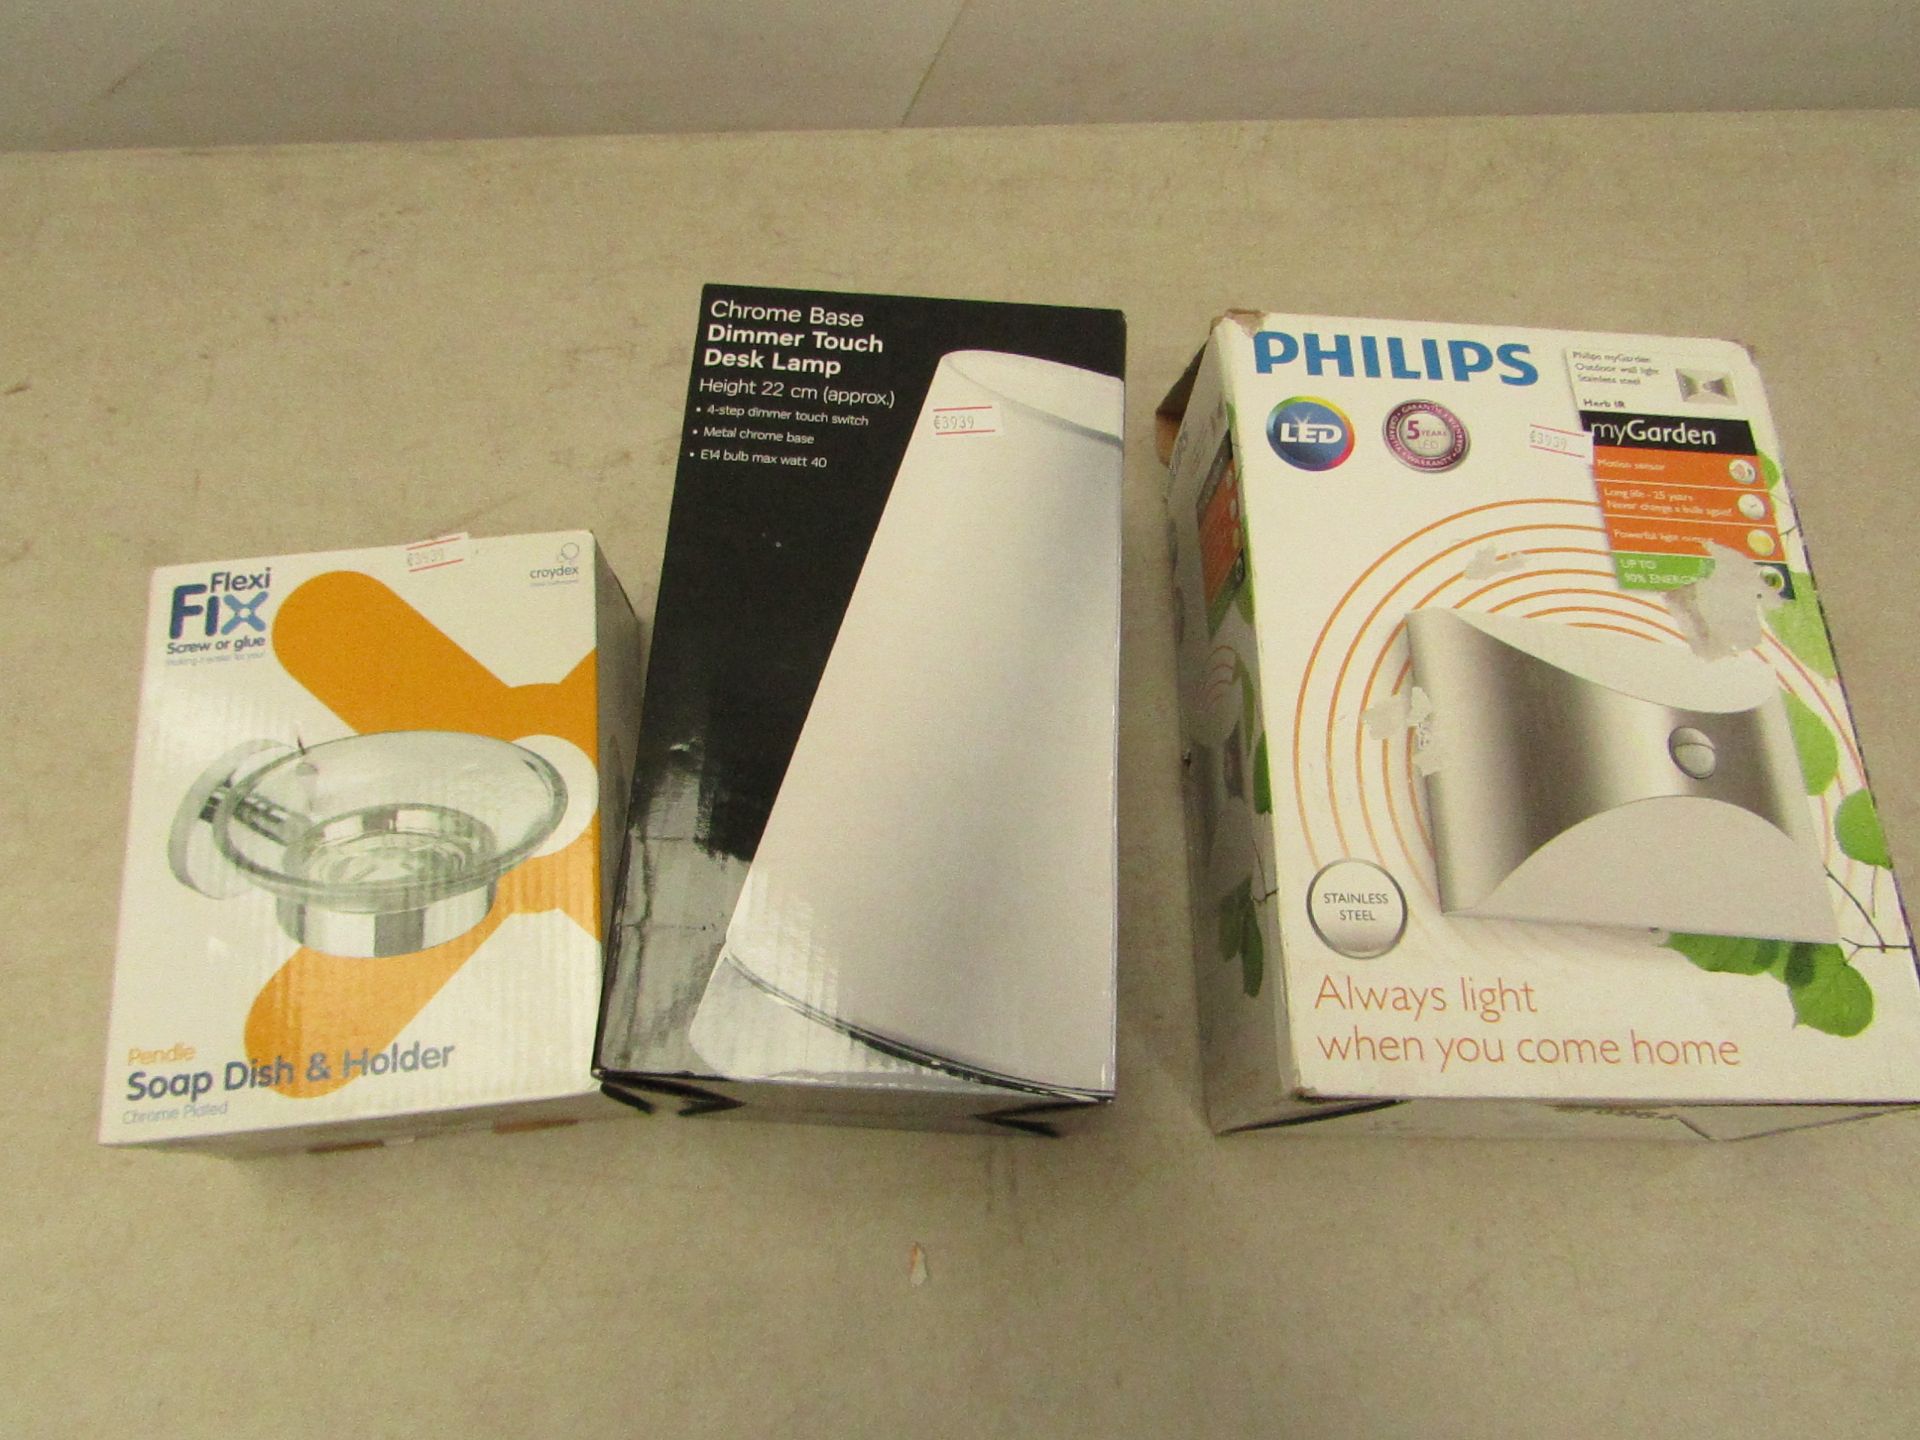 3x Items being; Flexi soap dish & holder, Chrome base dimmer touch lamp and Philips LED motion